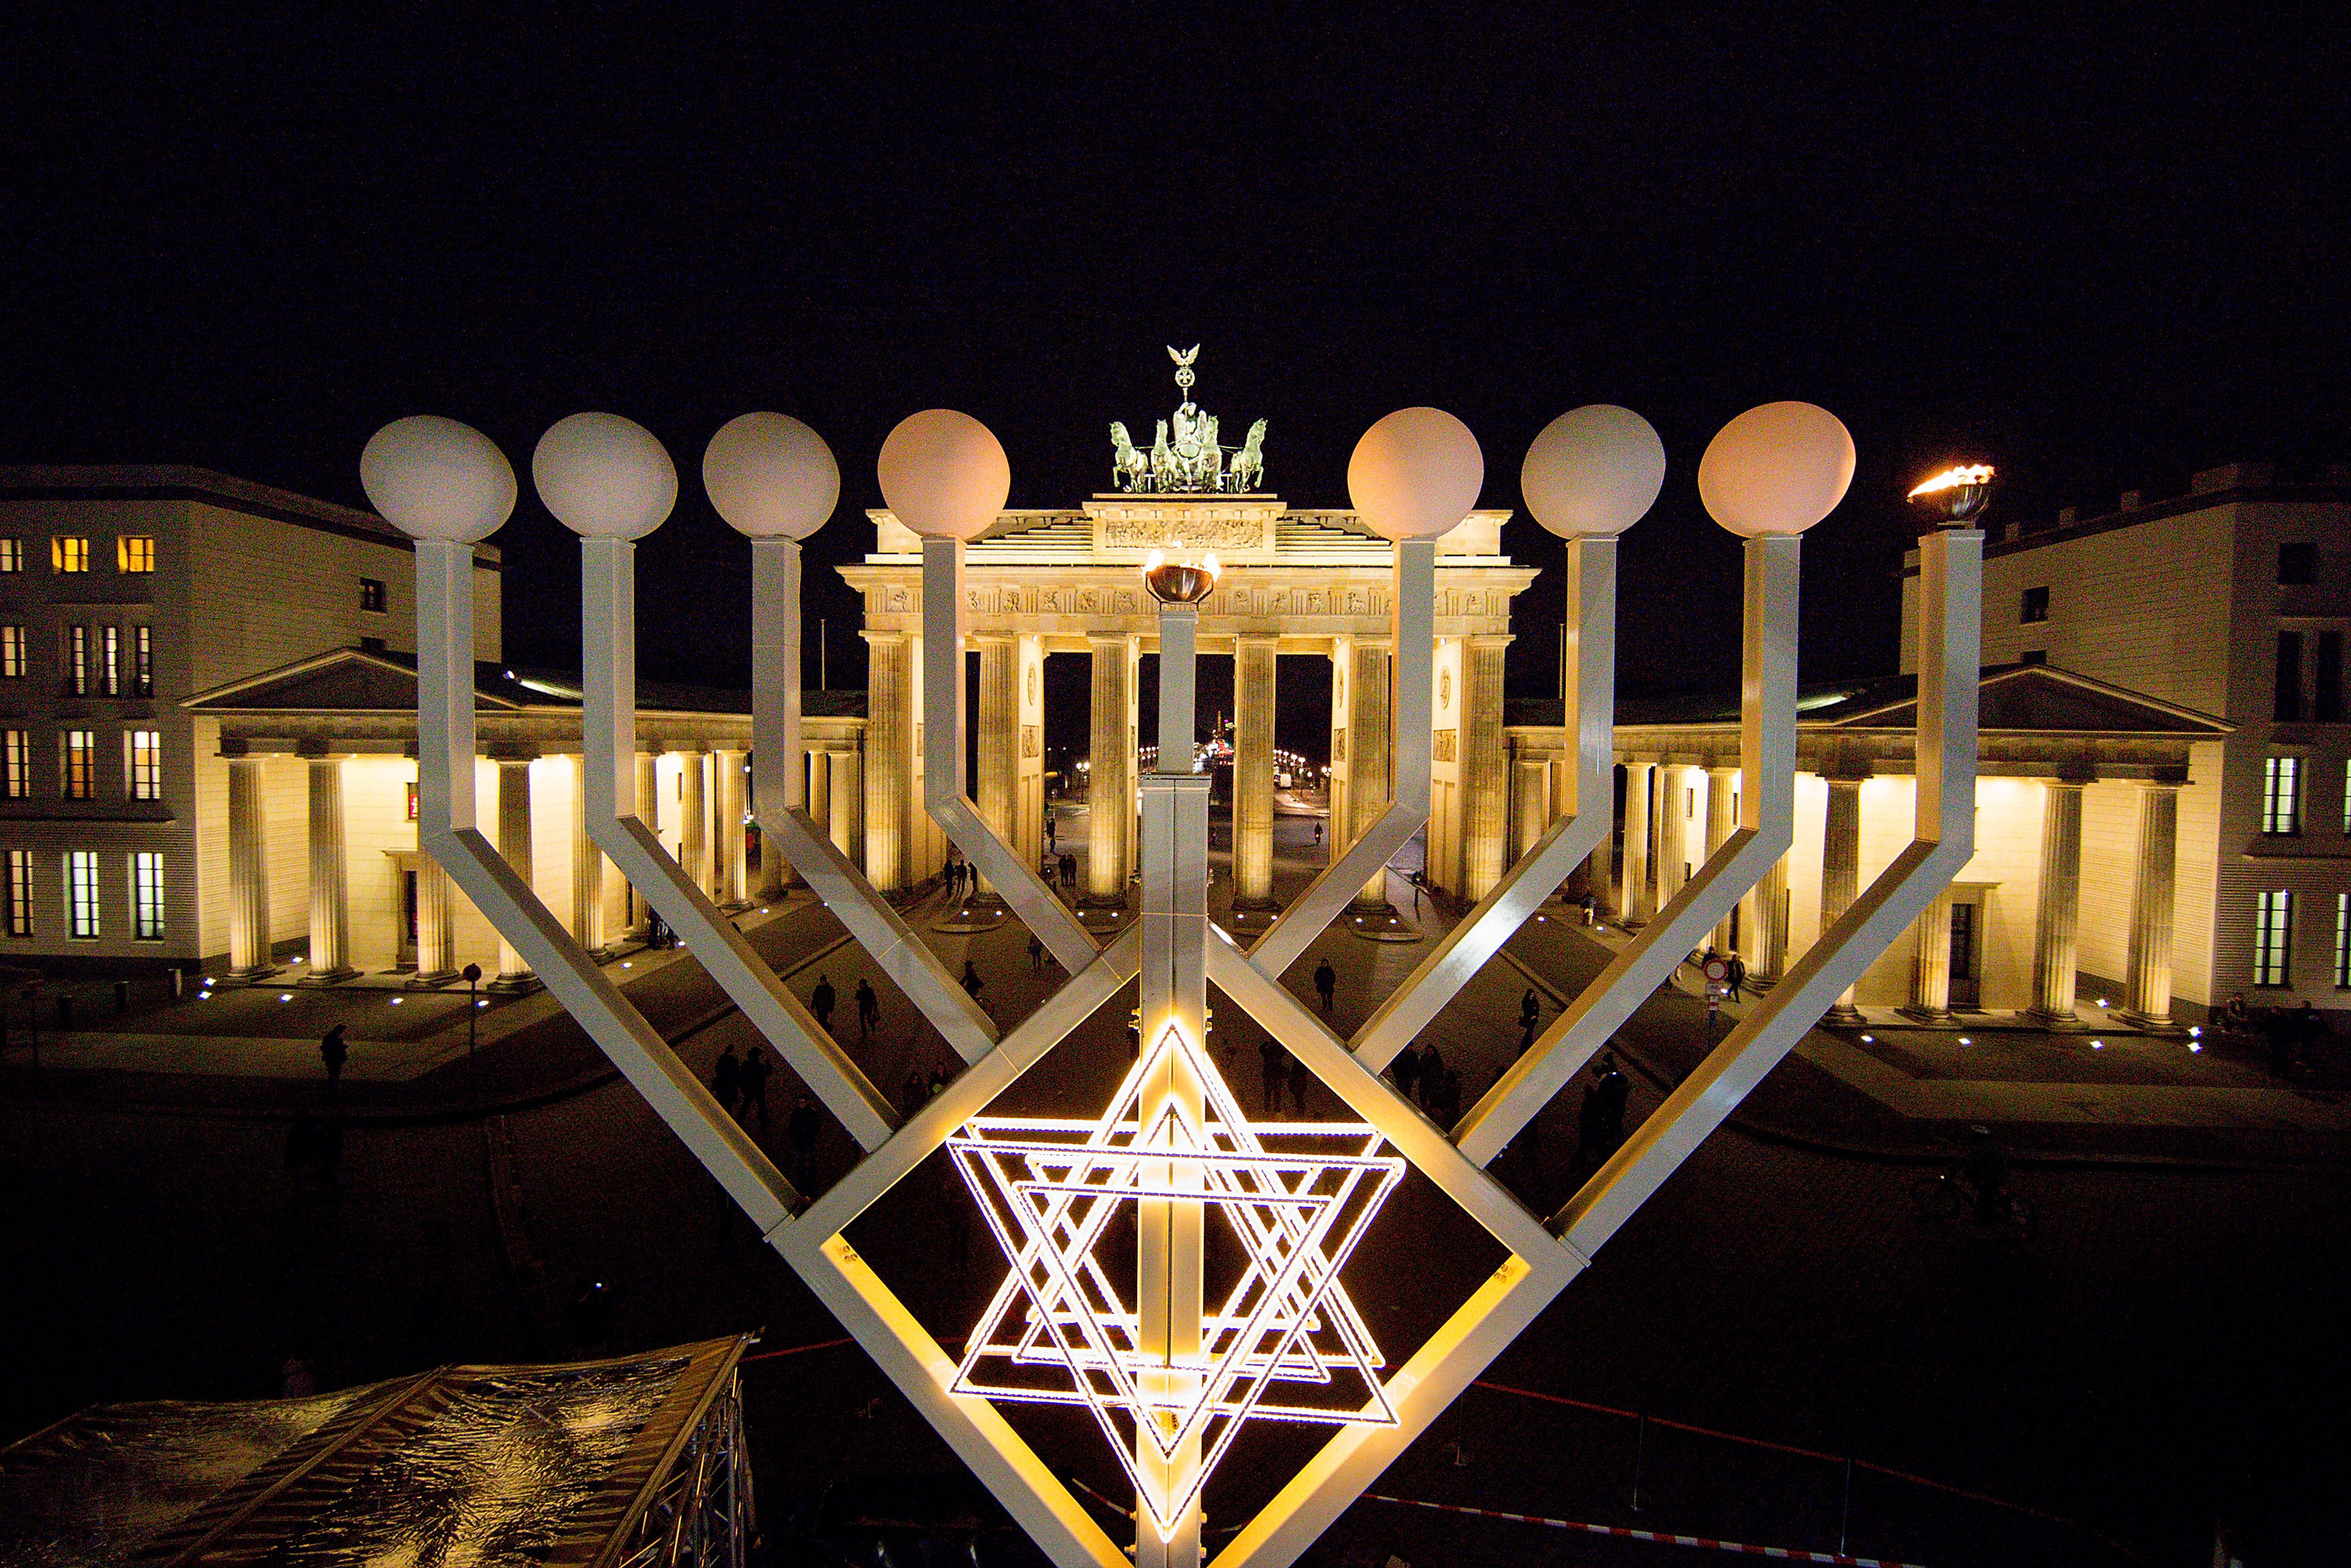 a large menorah with a star of david photographed at night with an ornate building behind it